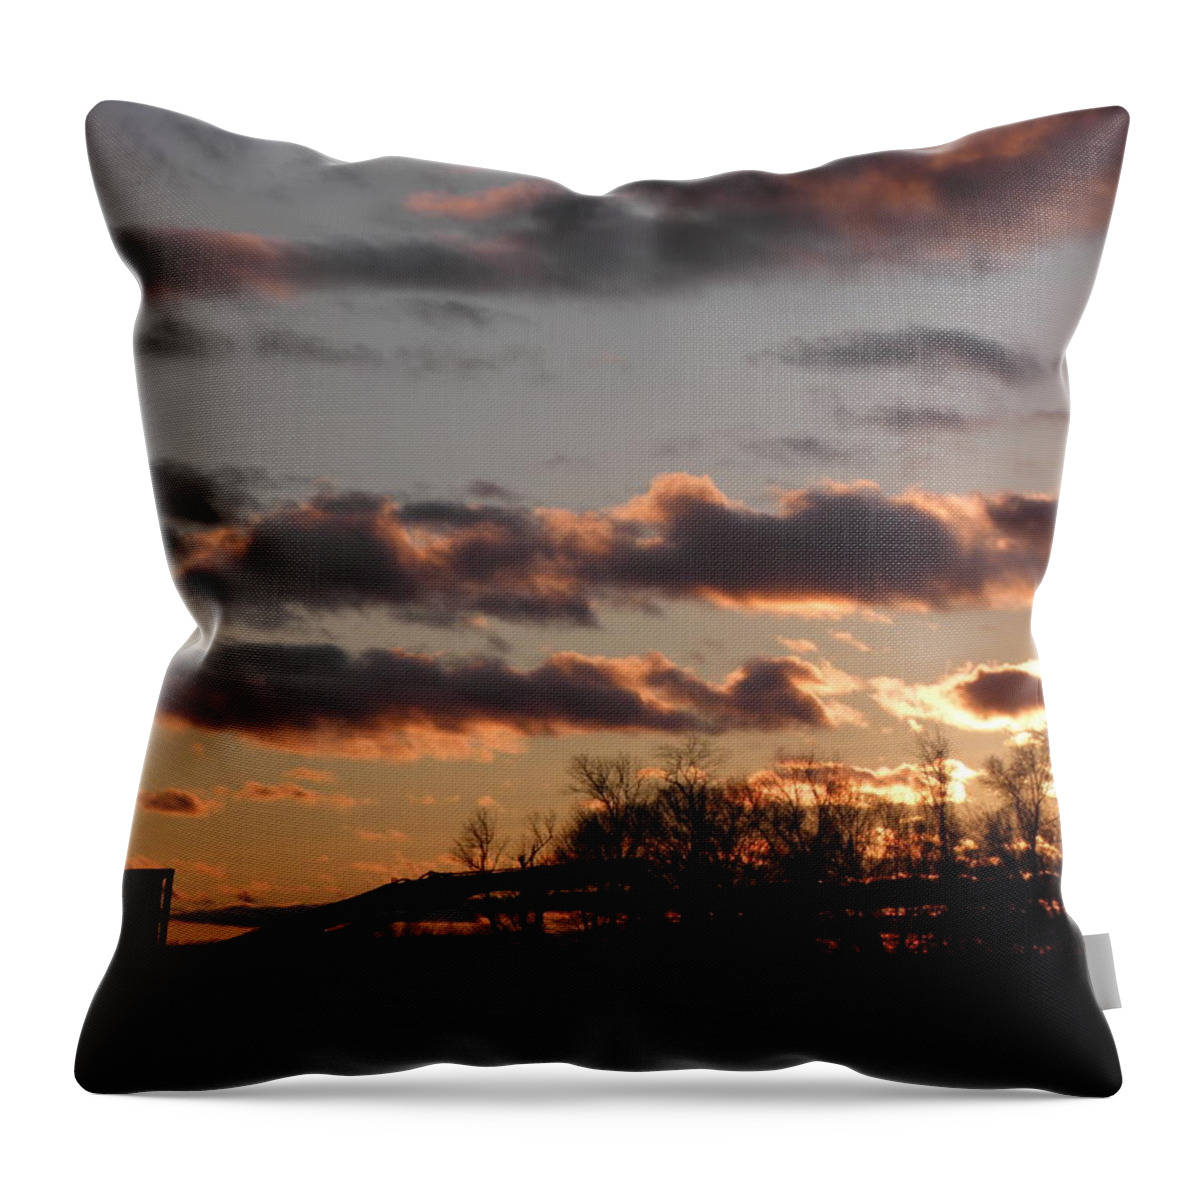 Sunset Throw Pillow featuring the photograph A Farmers Day Is Done by Kim Galluzzo Wozniak